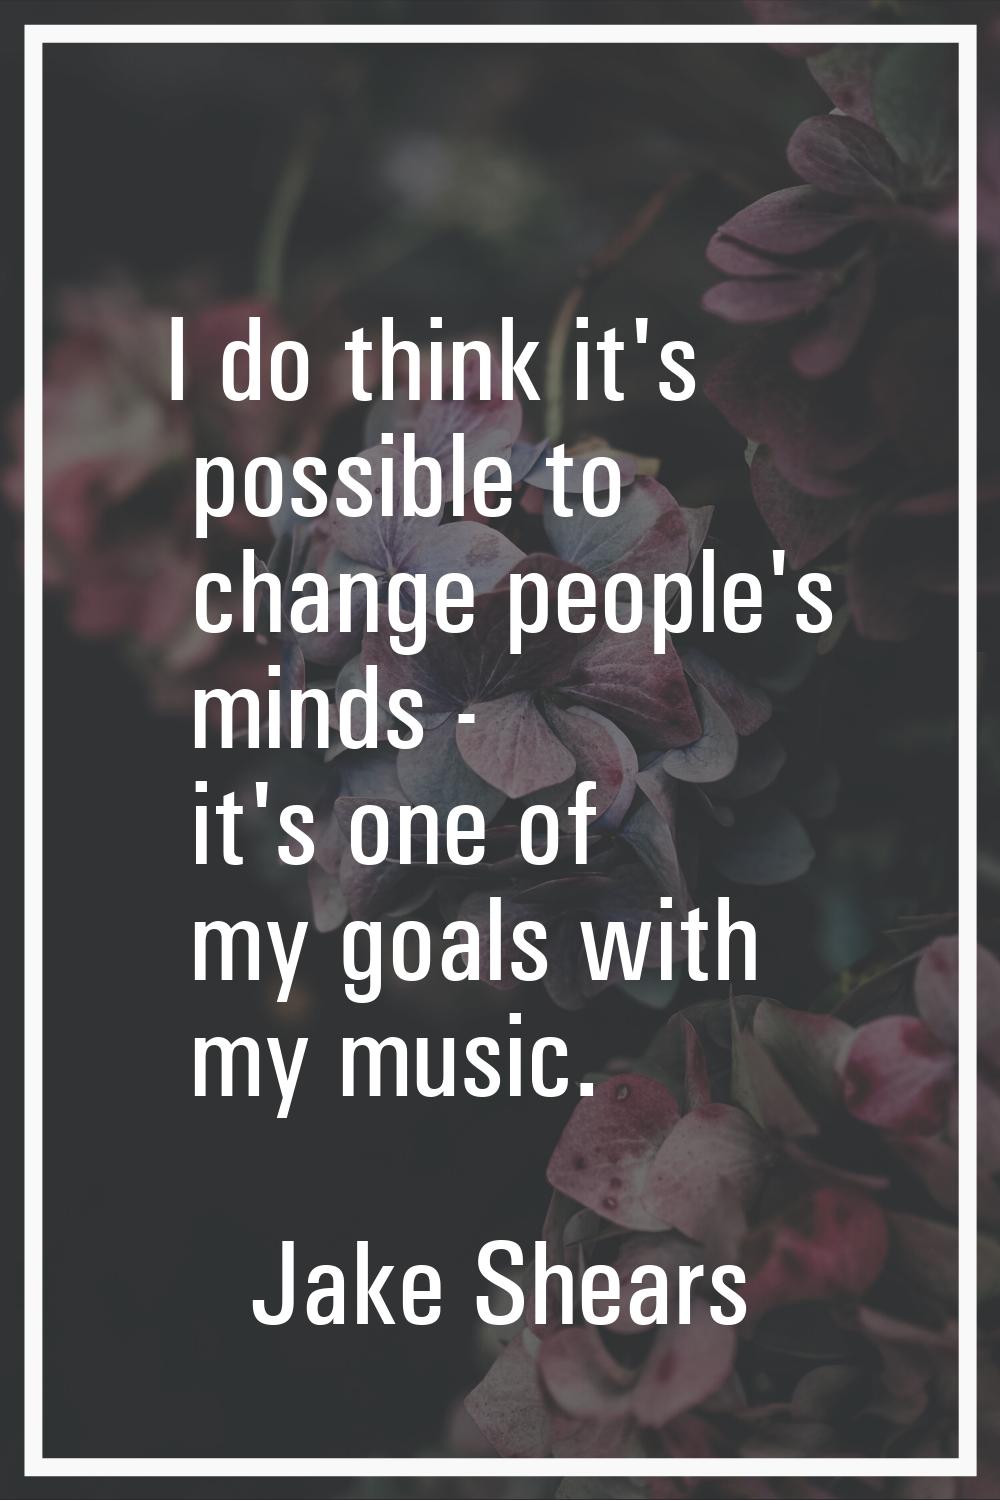 I do think it's possible to change people's minds - it's one of my goals with my music.